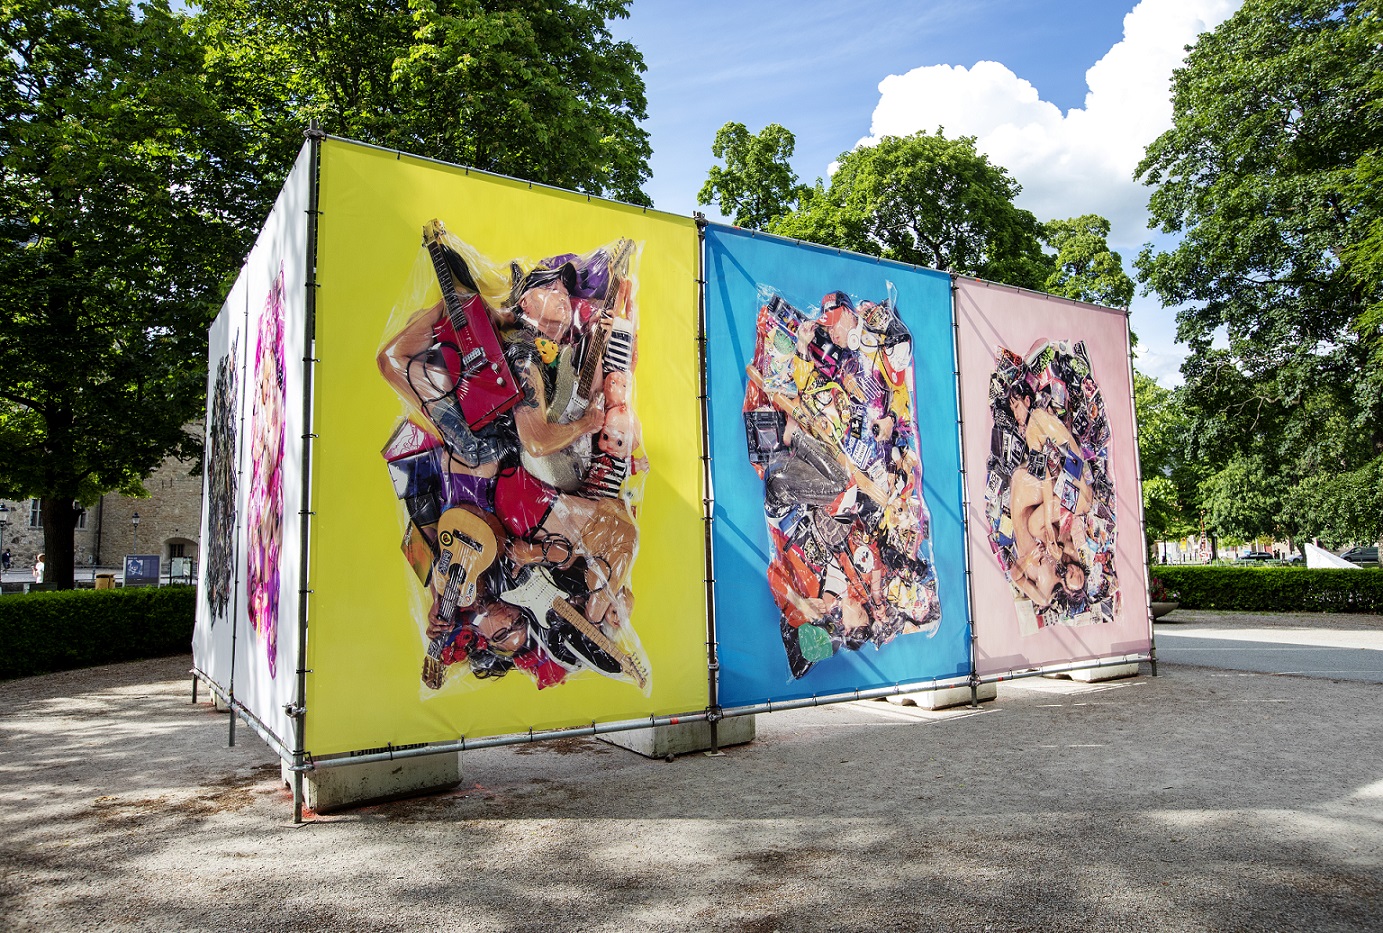 In a park there is a large stand that holds up five large photographs. Two images have a white background and the other three have different strong background colors yellow, blue and pink. The photos consist of people and everyday items that have been vacuum packed together.